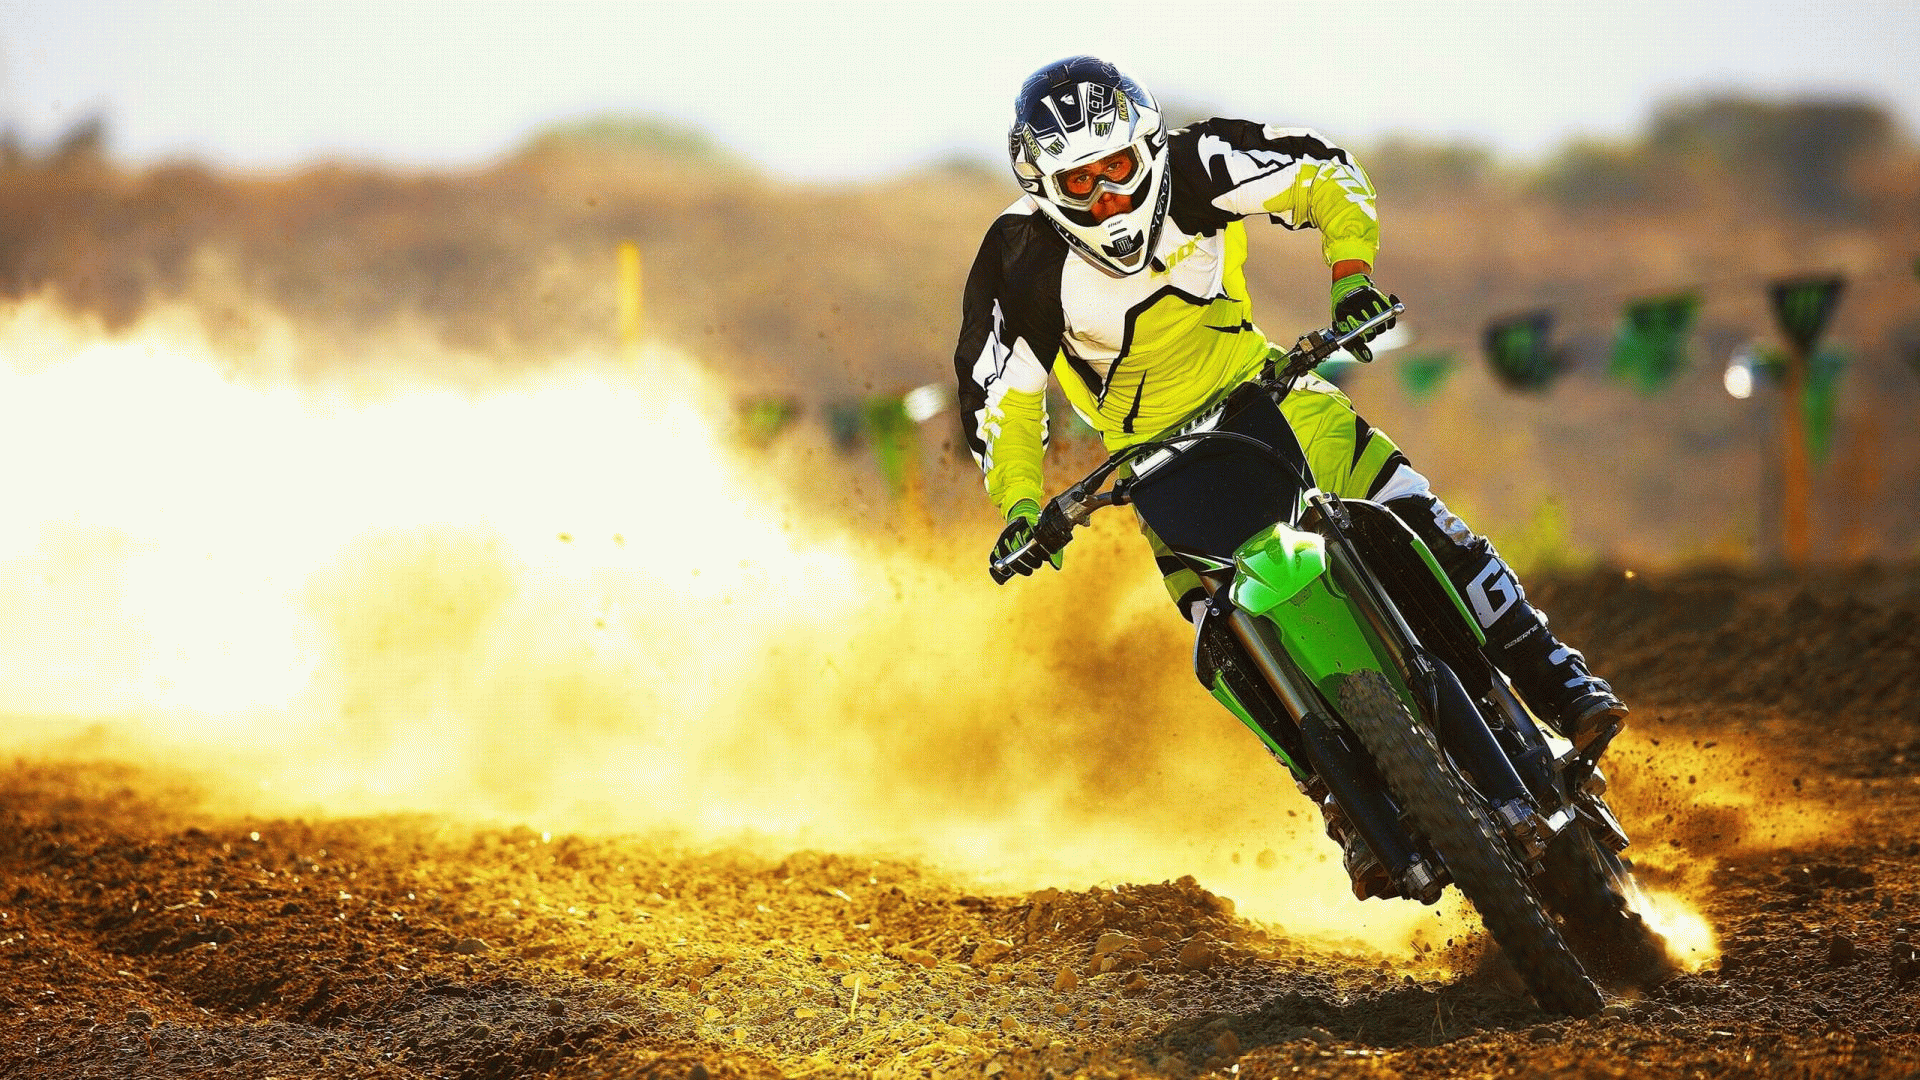 Motocross Full HD Wallpaper and Background Image | 1920x1080 | ID:296631